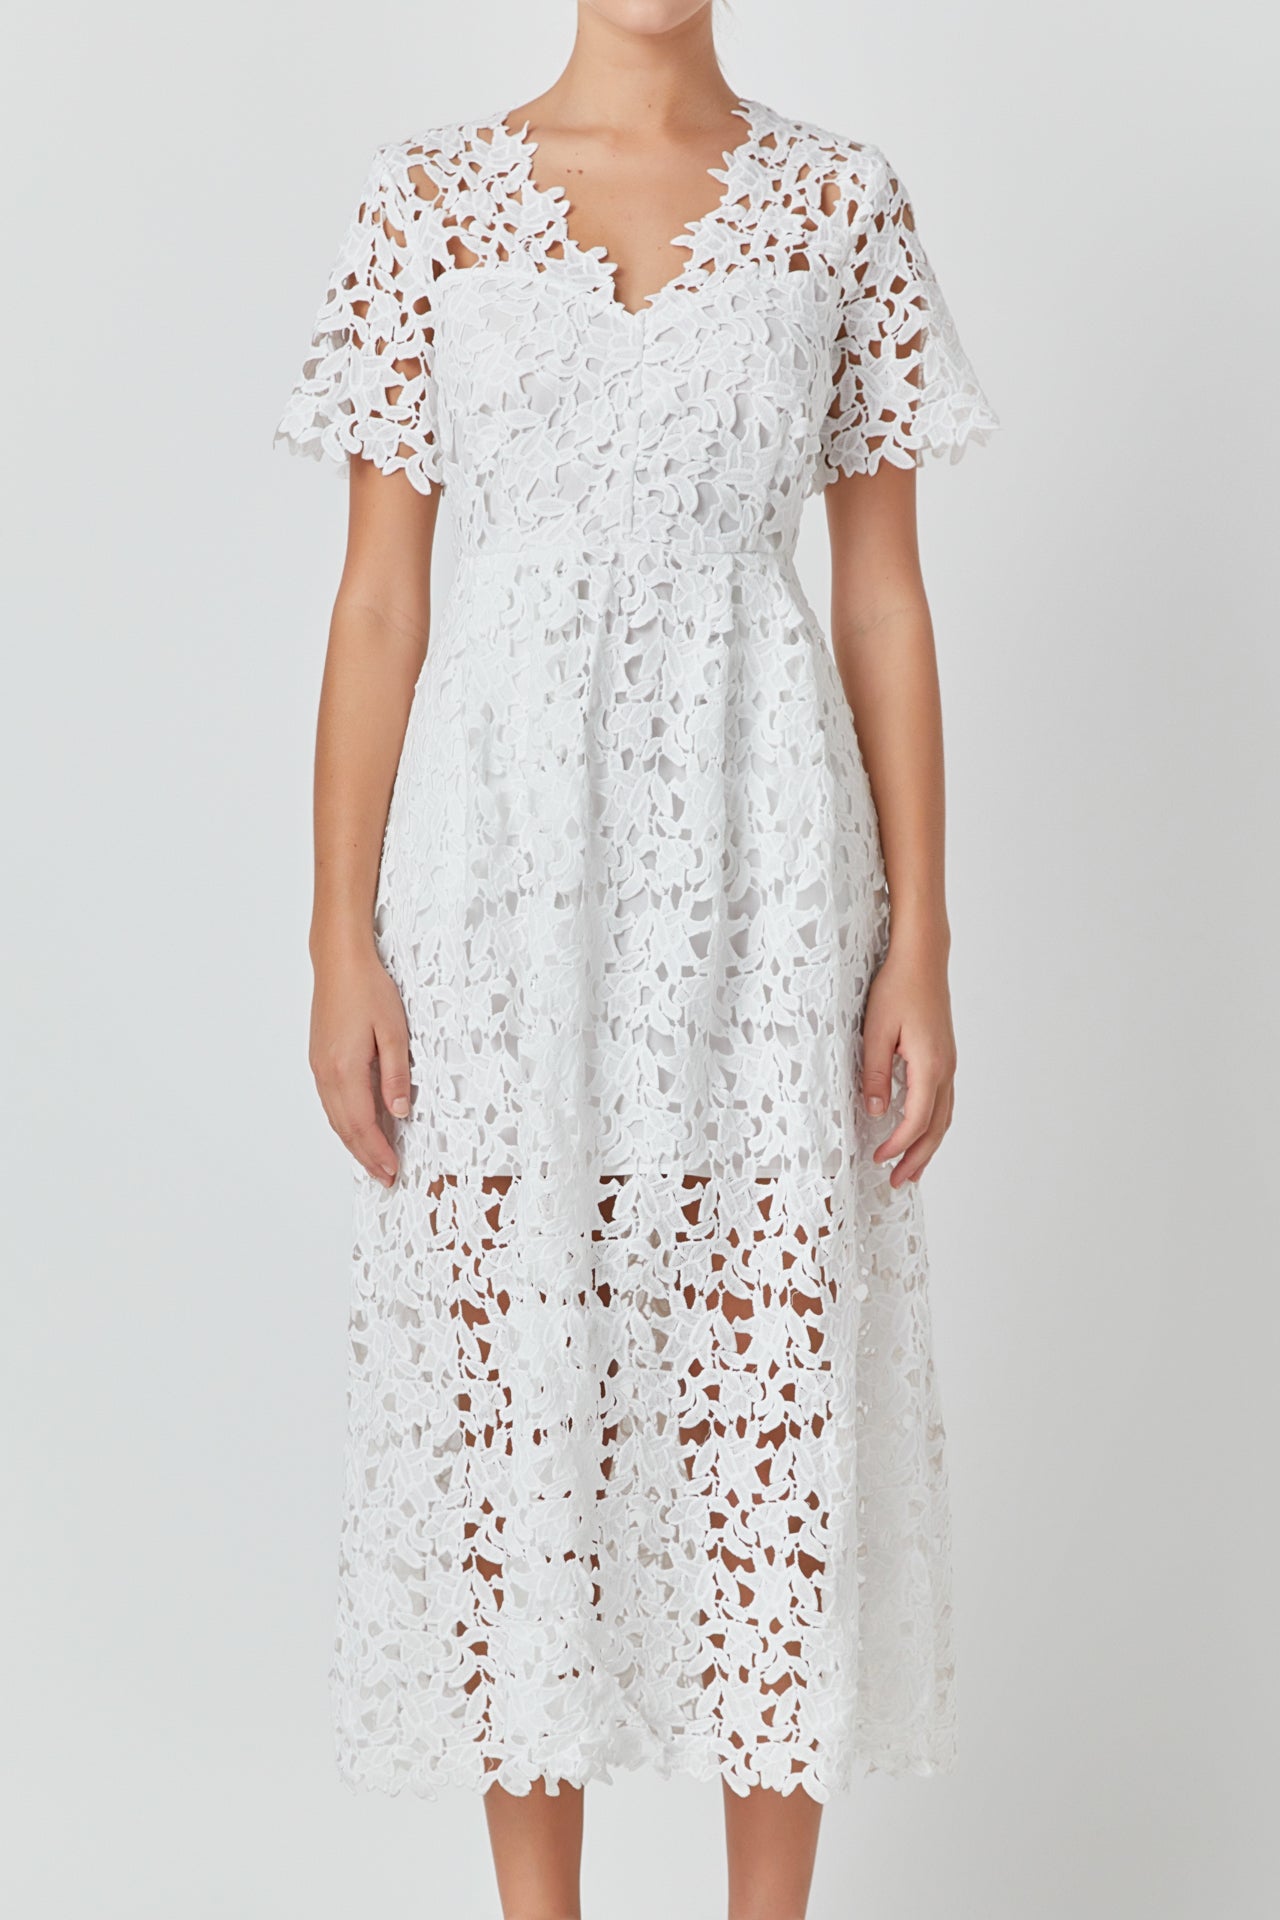 Endless Rose - All Over Lace Short Sleeves Midi Dress - Dresses in Women's Clothing available at endlessrose.com